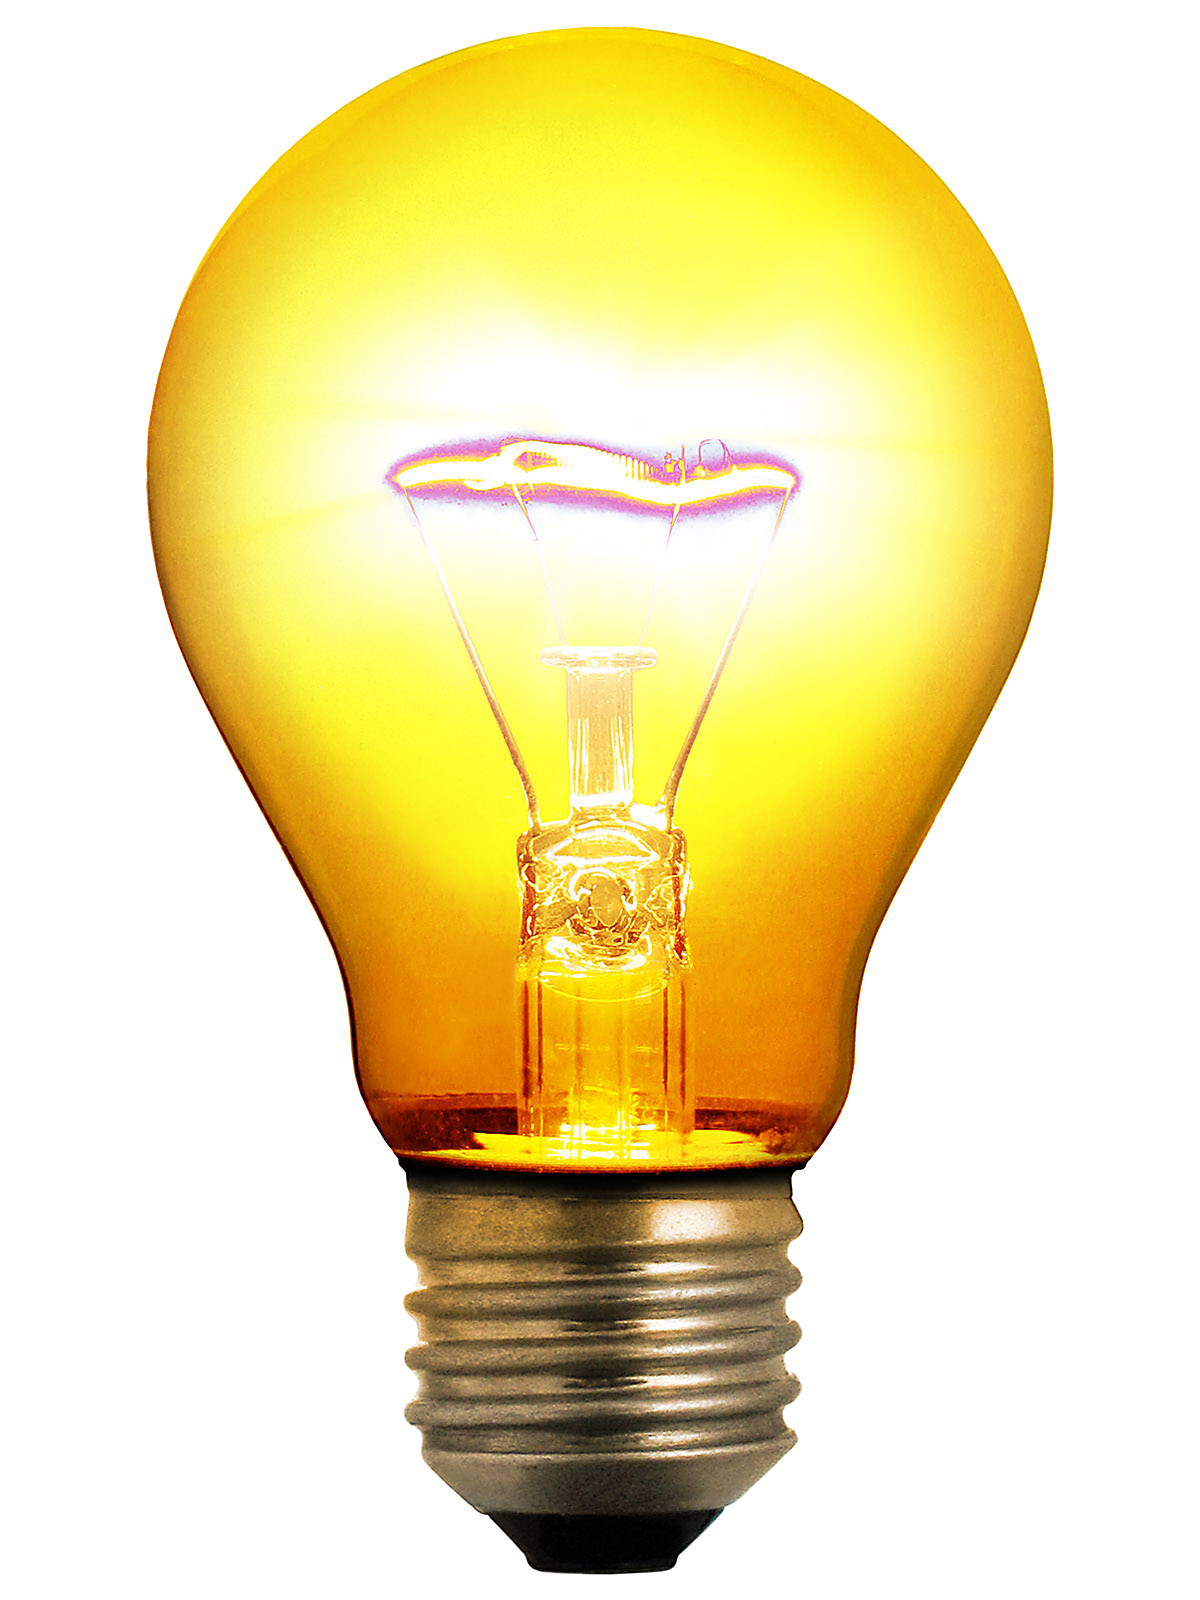 Download Light Bulb Png File HQ PNG Image in different resolution